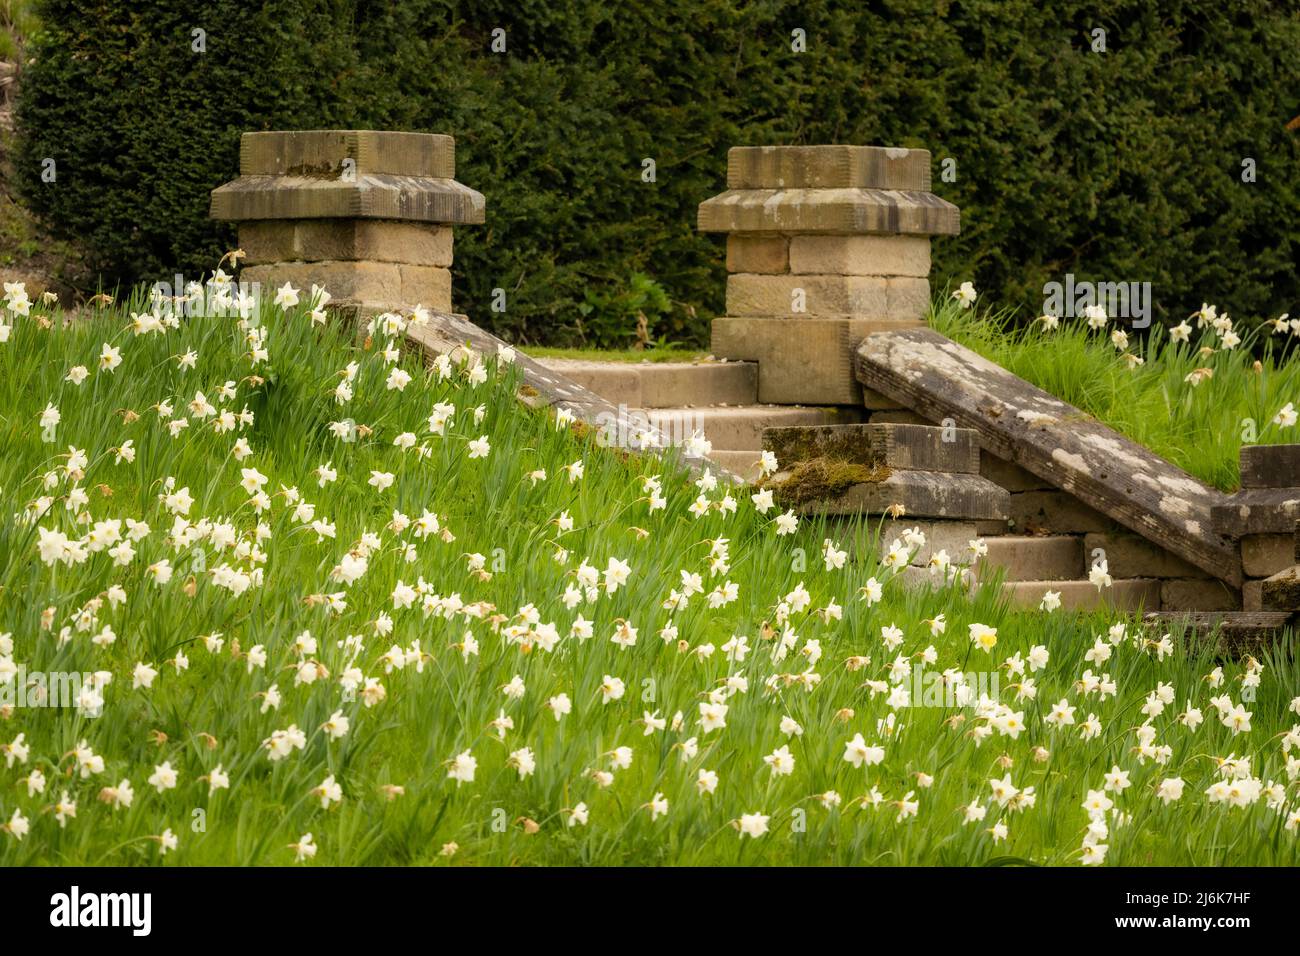 Spring flowers on a grassy bank with a flight of old stone stairs, Chatsworth House, Derbyshire, UK Stock Photo